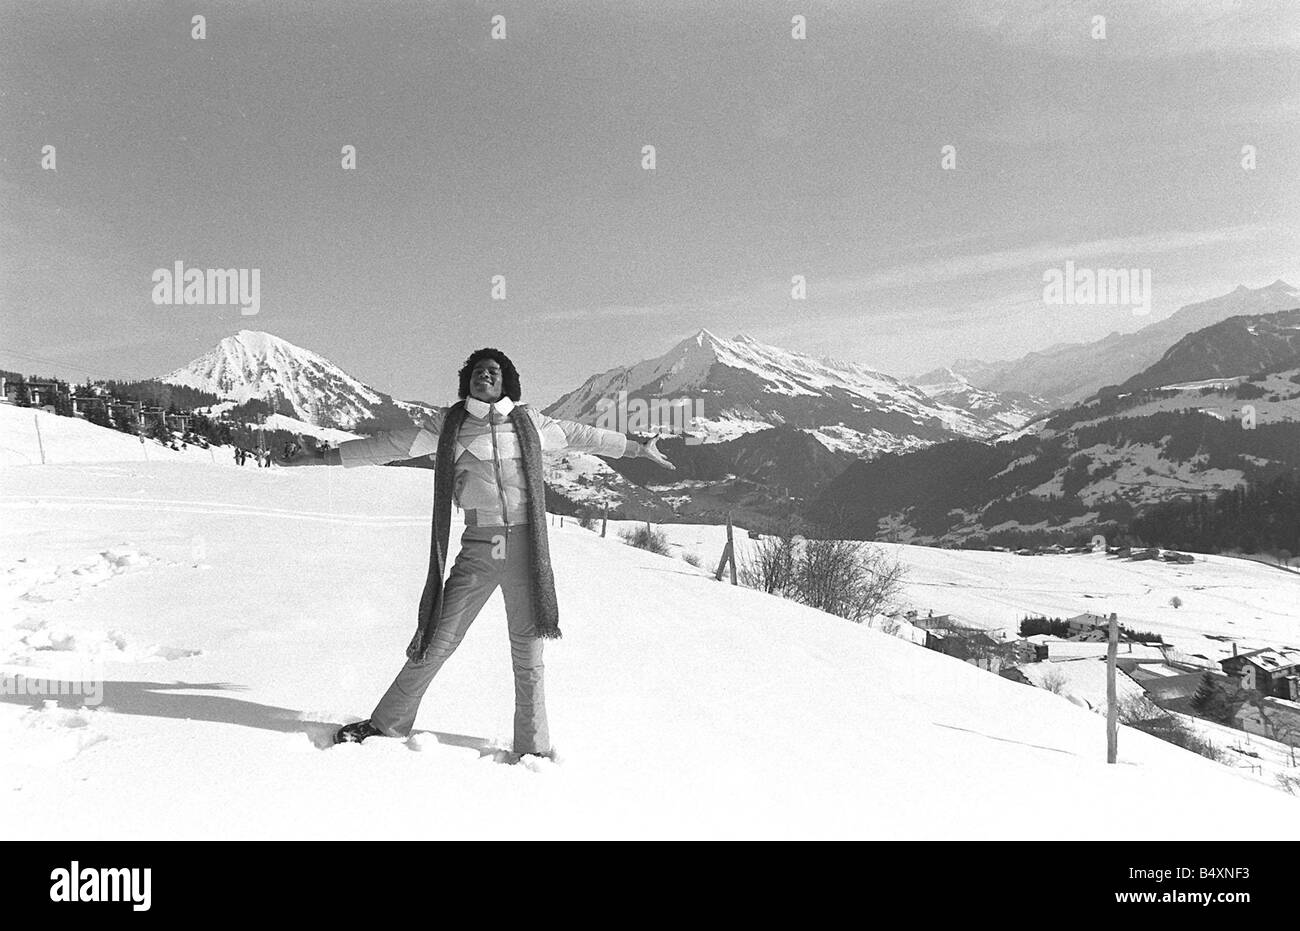 The Jackson 5 February 1979 Michael Jackson performing in Switzerland on the slopes 24 2 1979 The Jackson Five Stock Photo